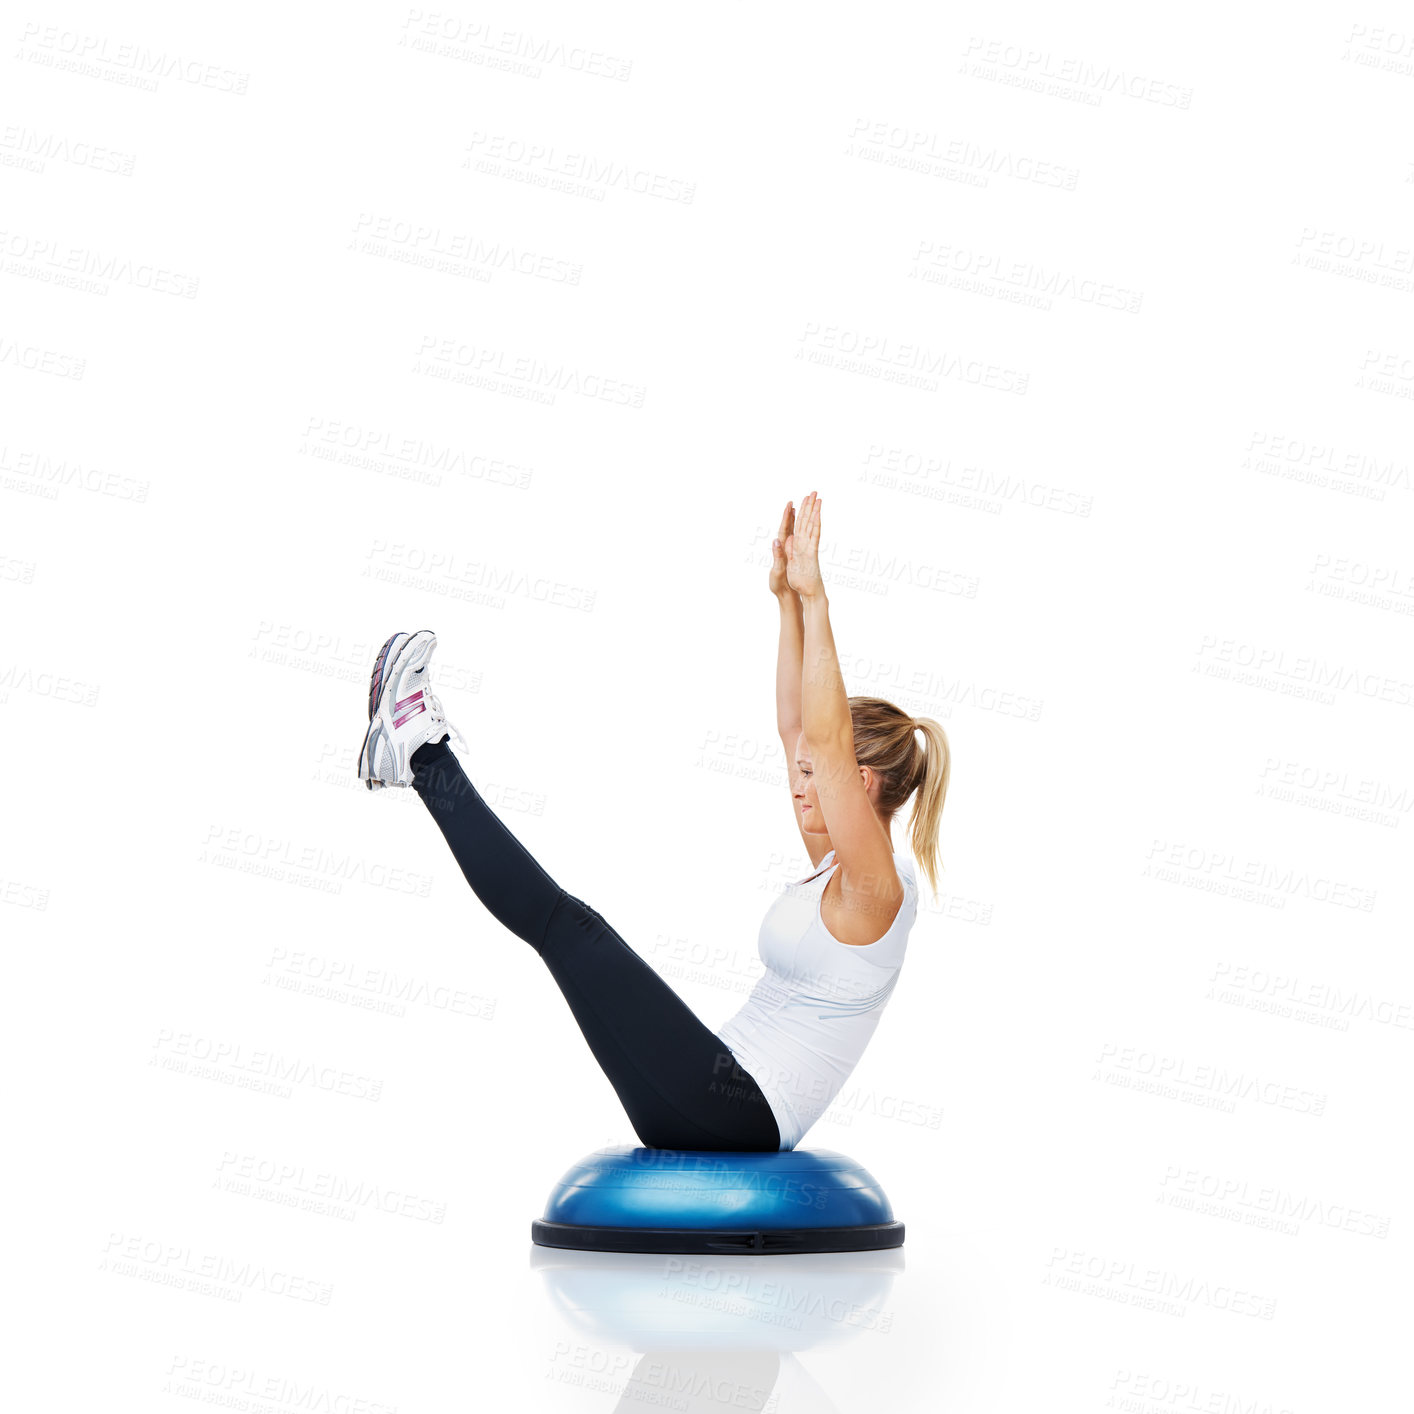 Buy stock photo Athlete, ball or body exercise in workout for abs or core strength isolated on white background. Woman stretching, training equipment or fitness for studio mockup space, balance challenge or wellness